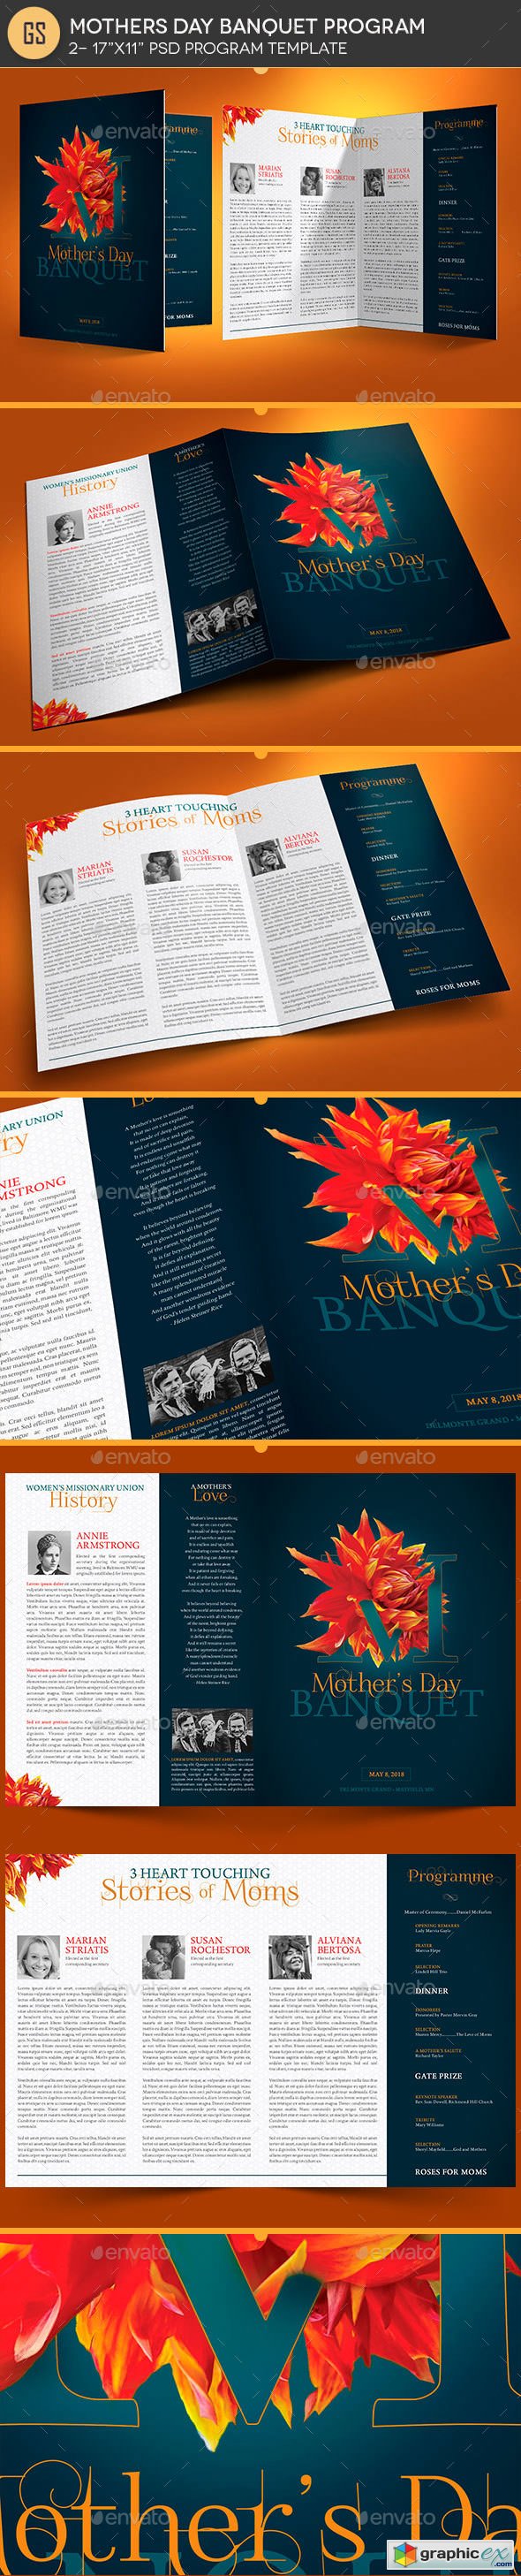 Mothers Day Banquet Program Template